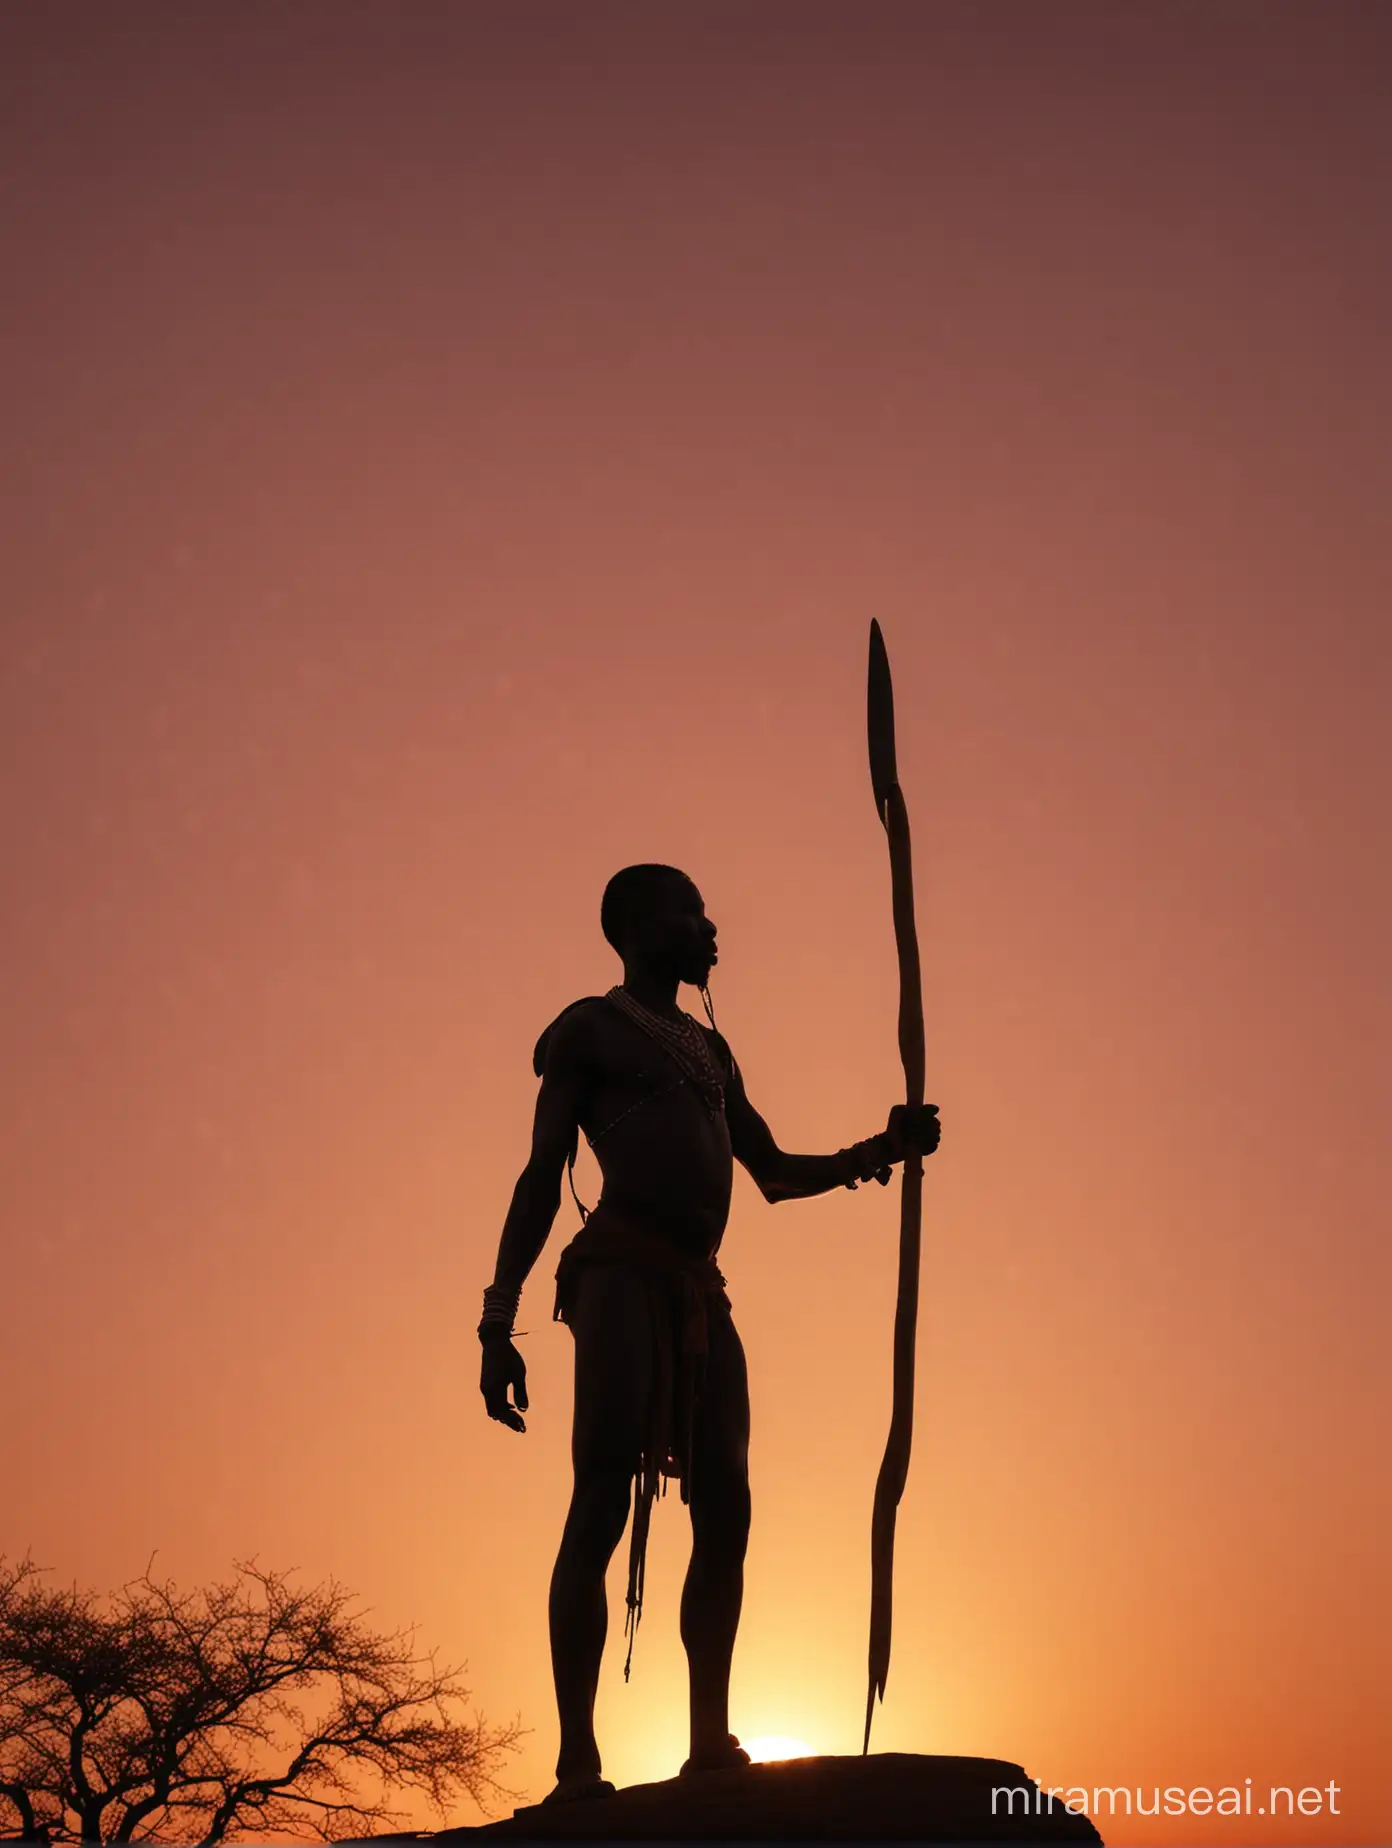 An African Dinka man, in silhouette, holding 
a wooden spear, standing on a rock outcropping in Africa against a red sunset.